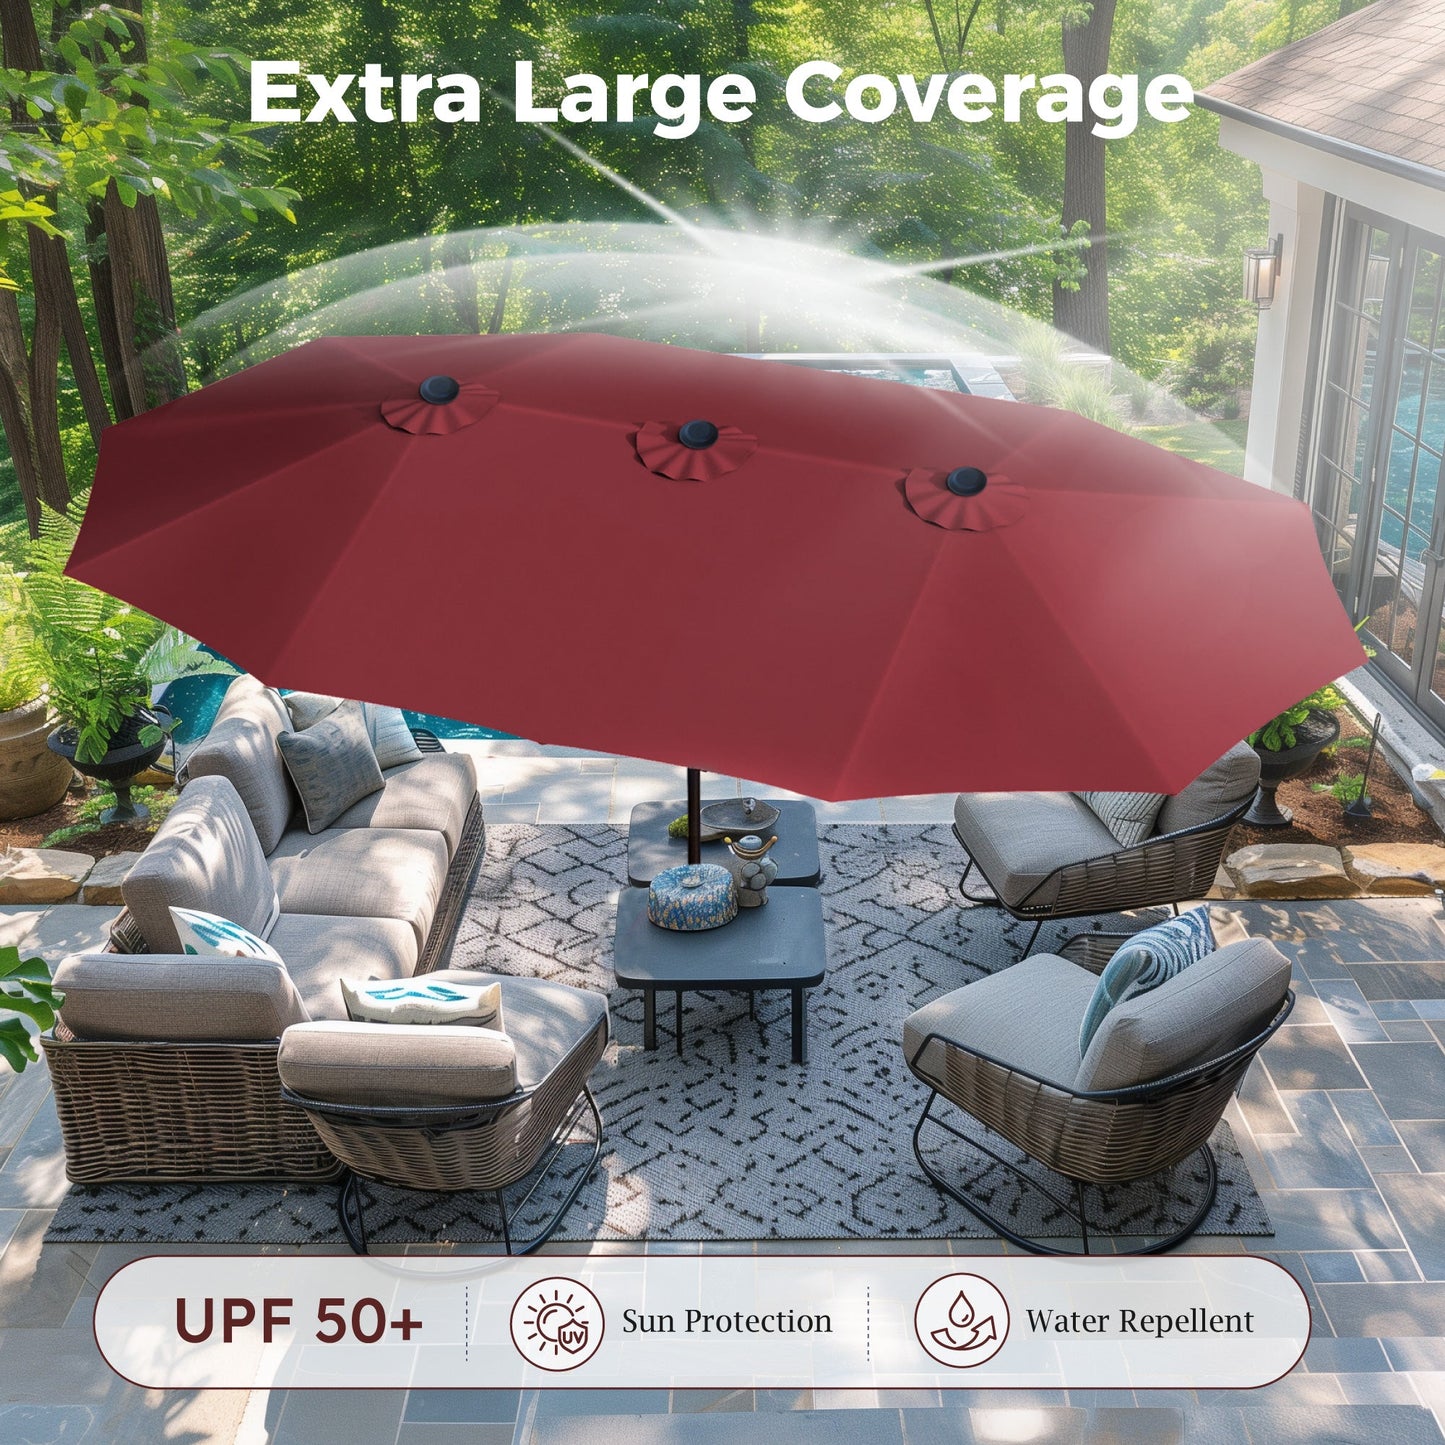 Alpha Joy 15ft Outdoor Patio Umbrella Extra-Large Double-Sided Garden Umbrella with Crank Handle and Base - Red